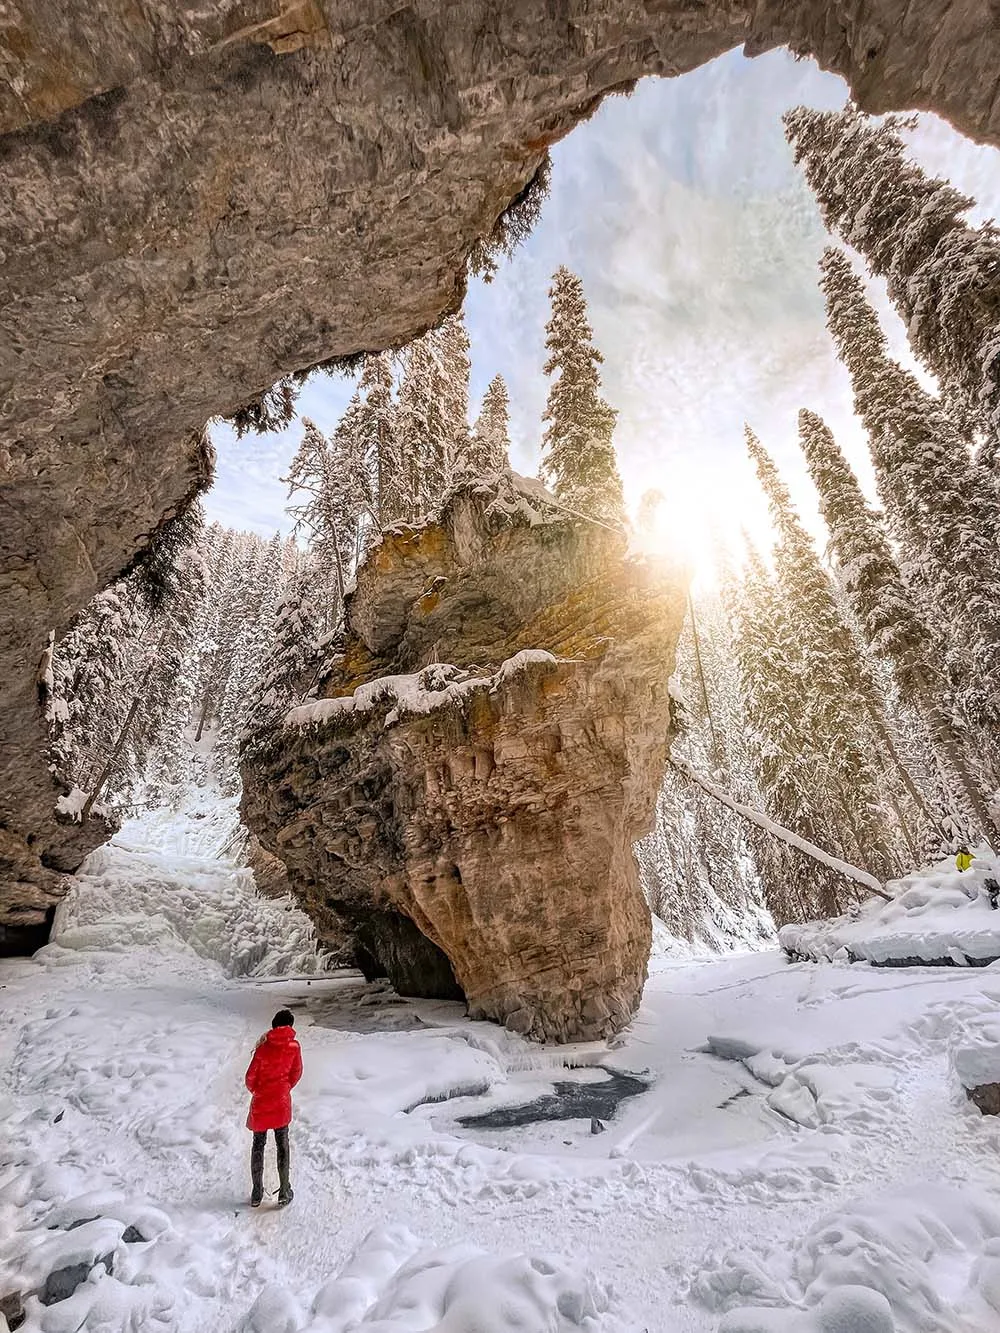 Banff is absolutely incredible. Although most people visit Banff when the weather is warmer, it's absolutely magical to visit in winter. Here's a local's guide to some of the best things to do in in Banff in winter. From hikes and trails to winter sports, family friendly excursions, dining experiences and more. You won't want to miss this guide that will surely convince you to add Banff in winter to your travel bucket list. Pictured here: Johnston Canyon secret cave